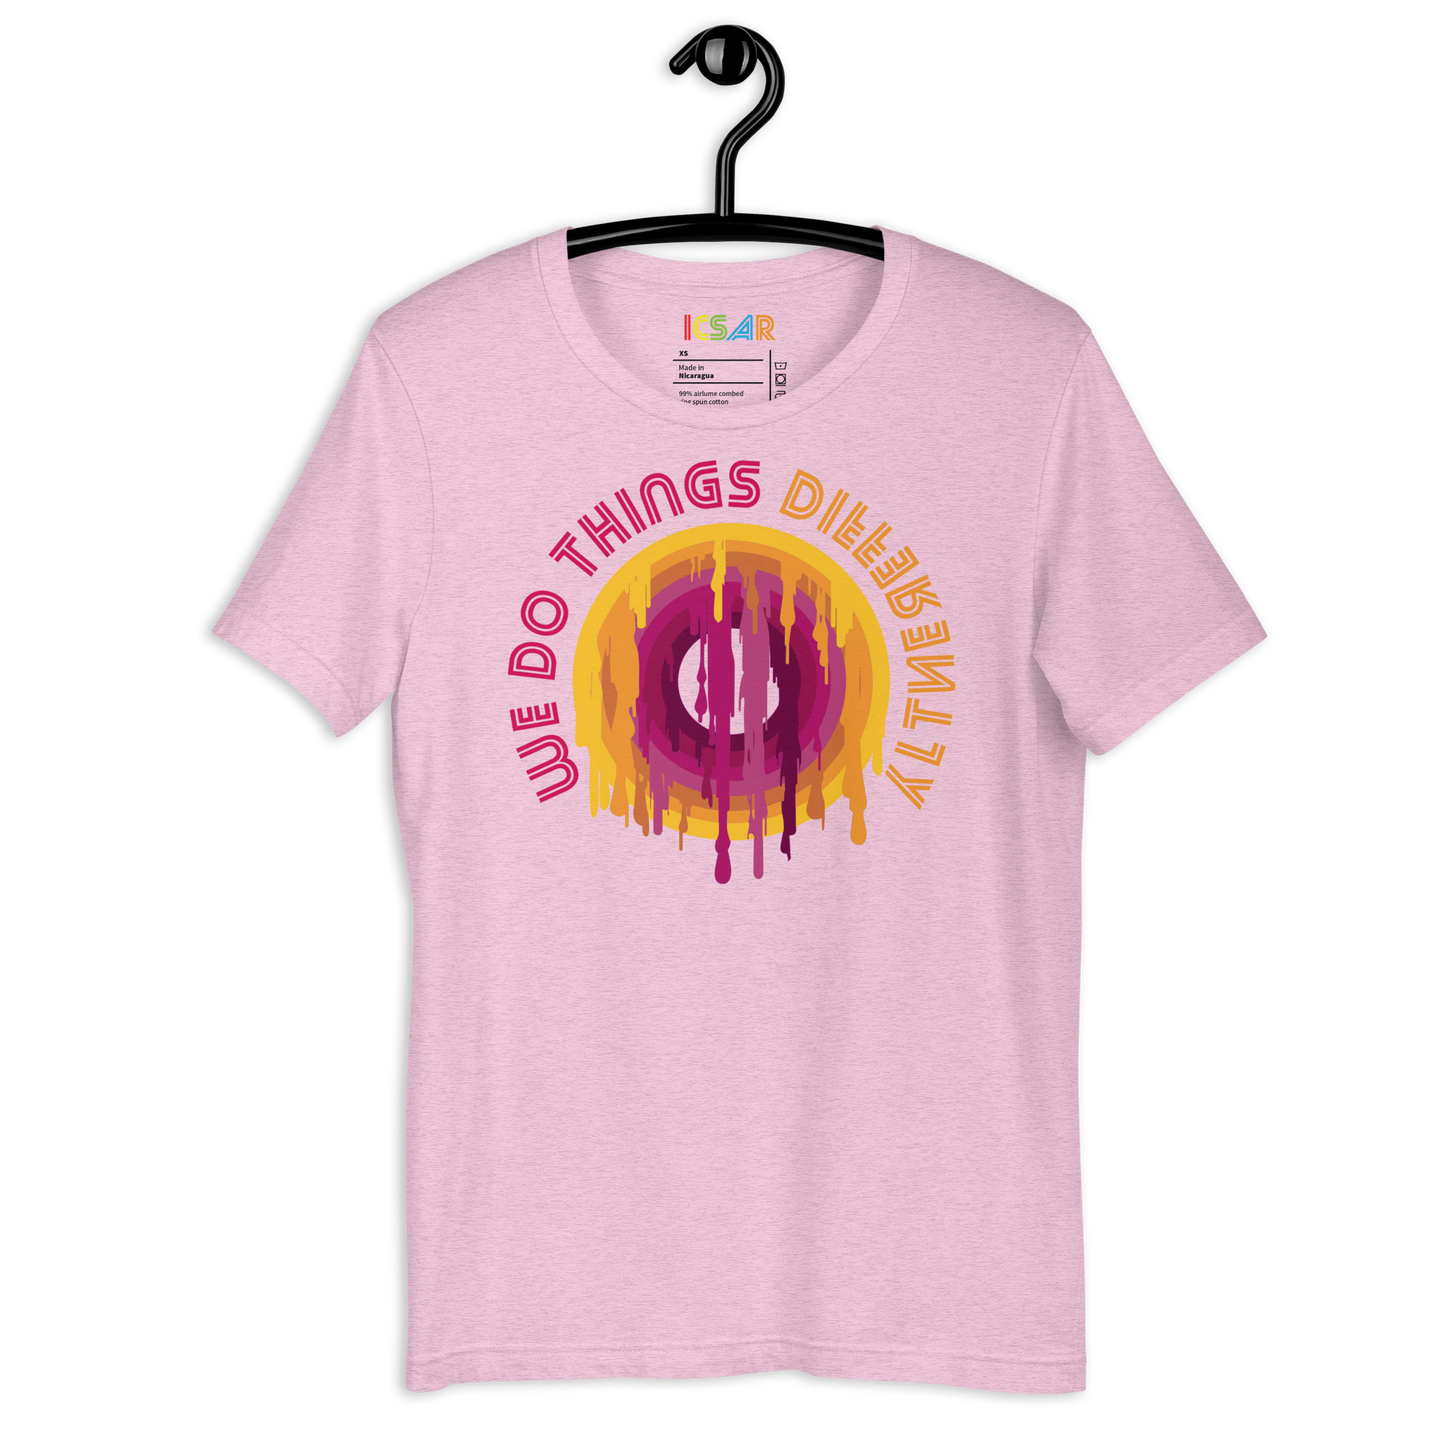 Unisex T-Shirt "We do things differently"